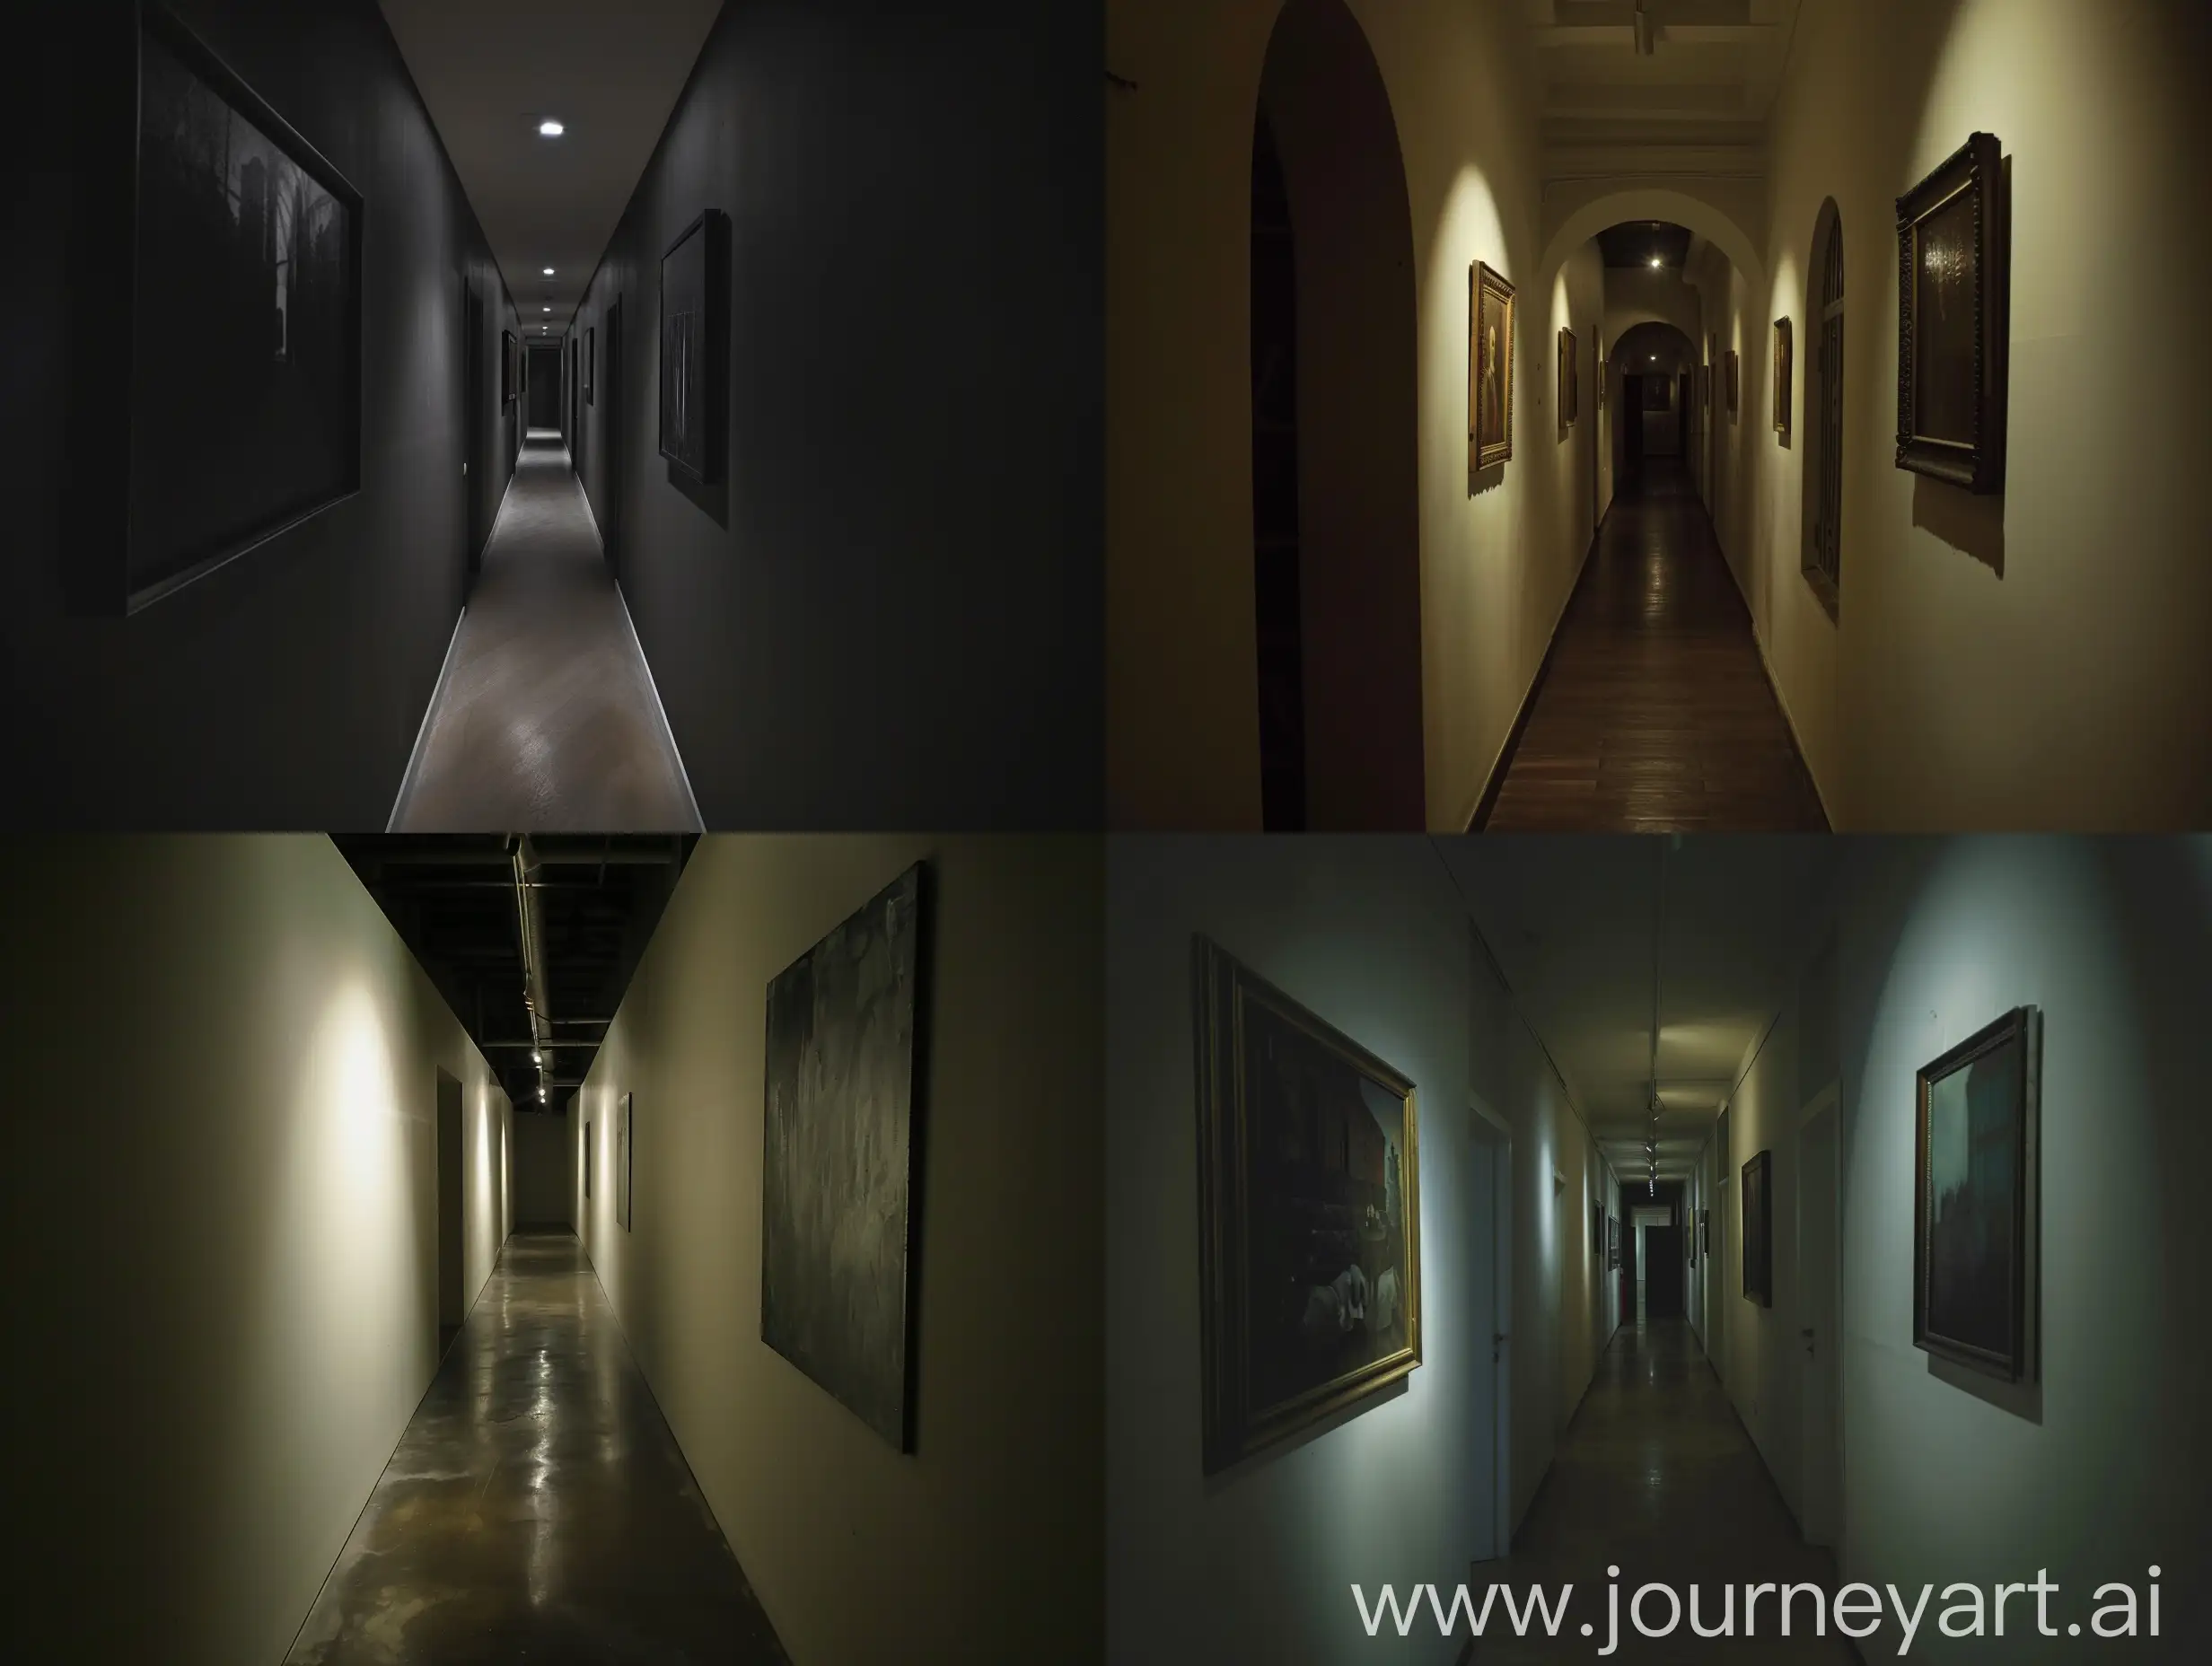 A dark and narrow gallery. The gallery has a corridor-like shape that creates a sense of mystery and exploration. The gallery has no windows and relies on indirect artificial lighting.